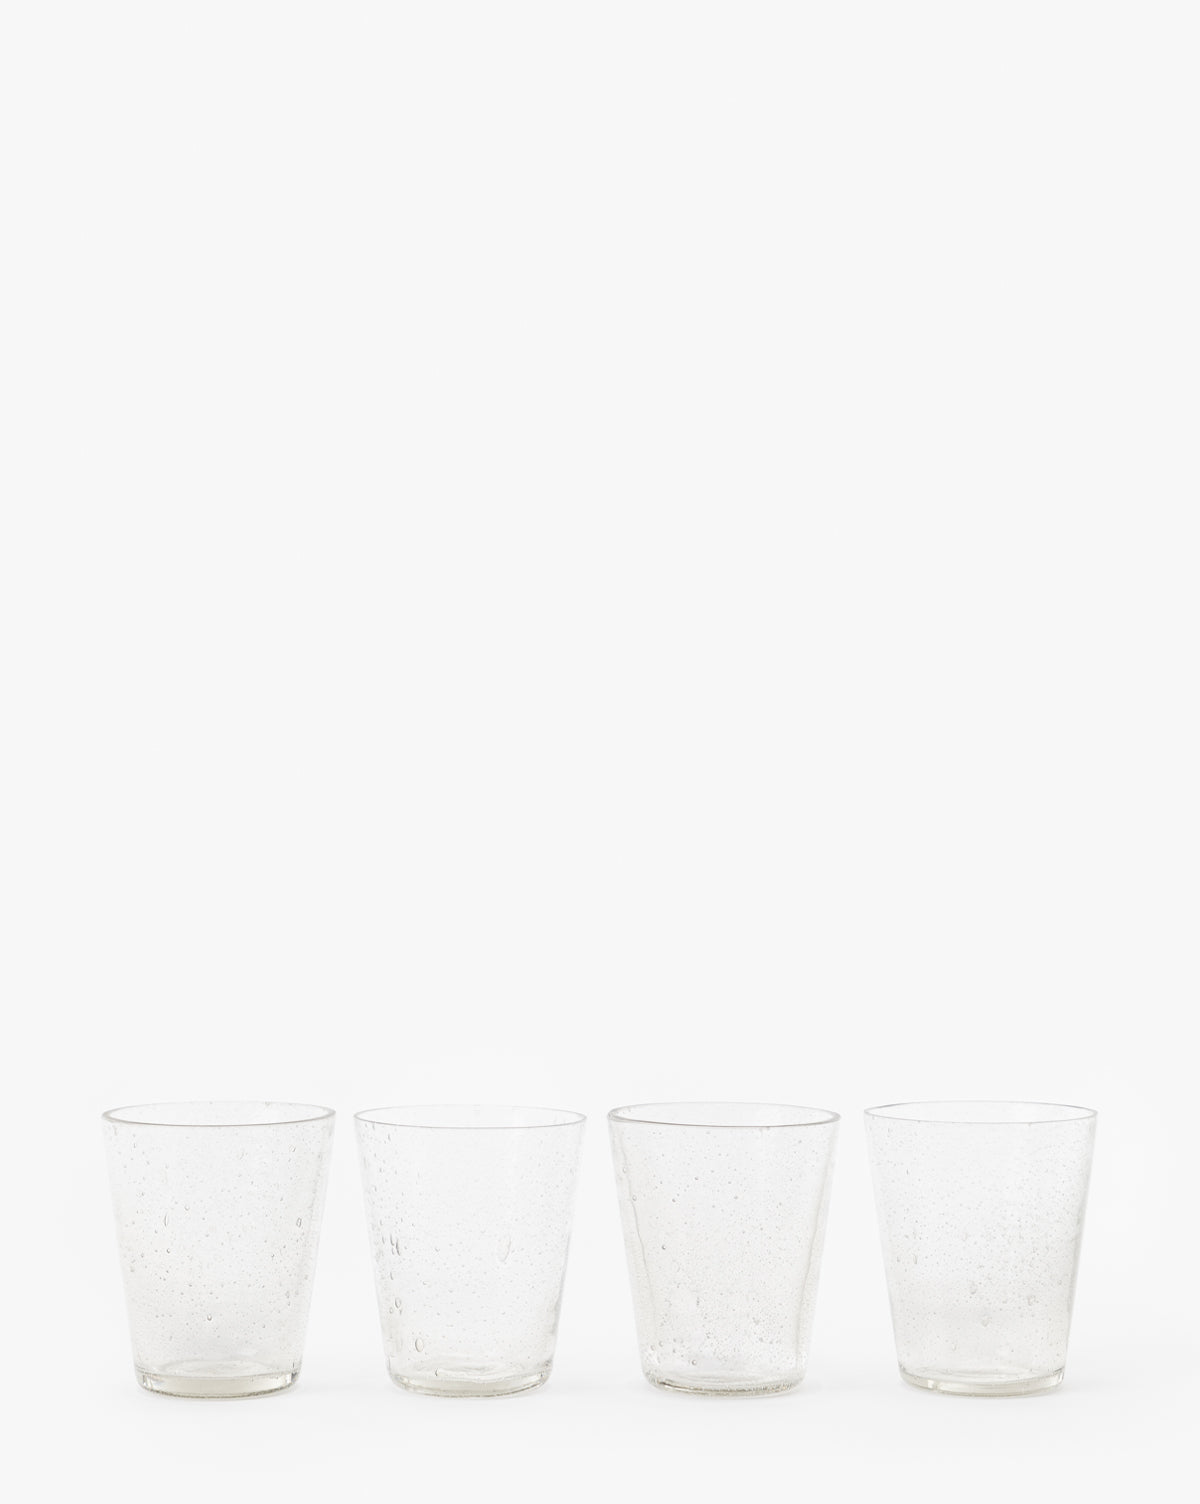 BIDK Home, Oden Bubble Drinking Glasses (Set of 4)